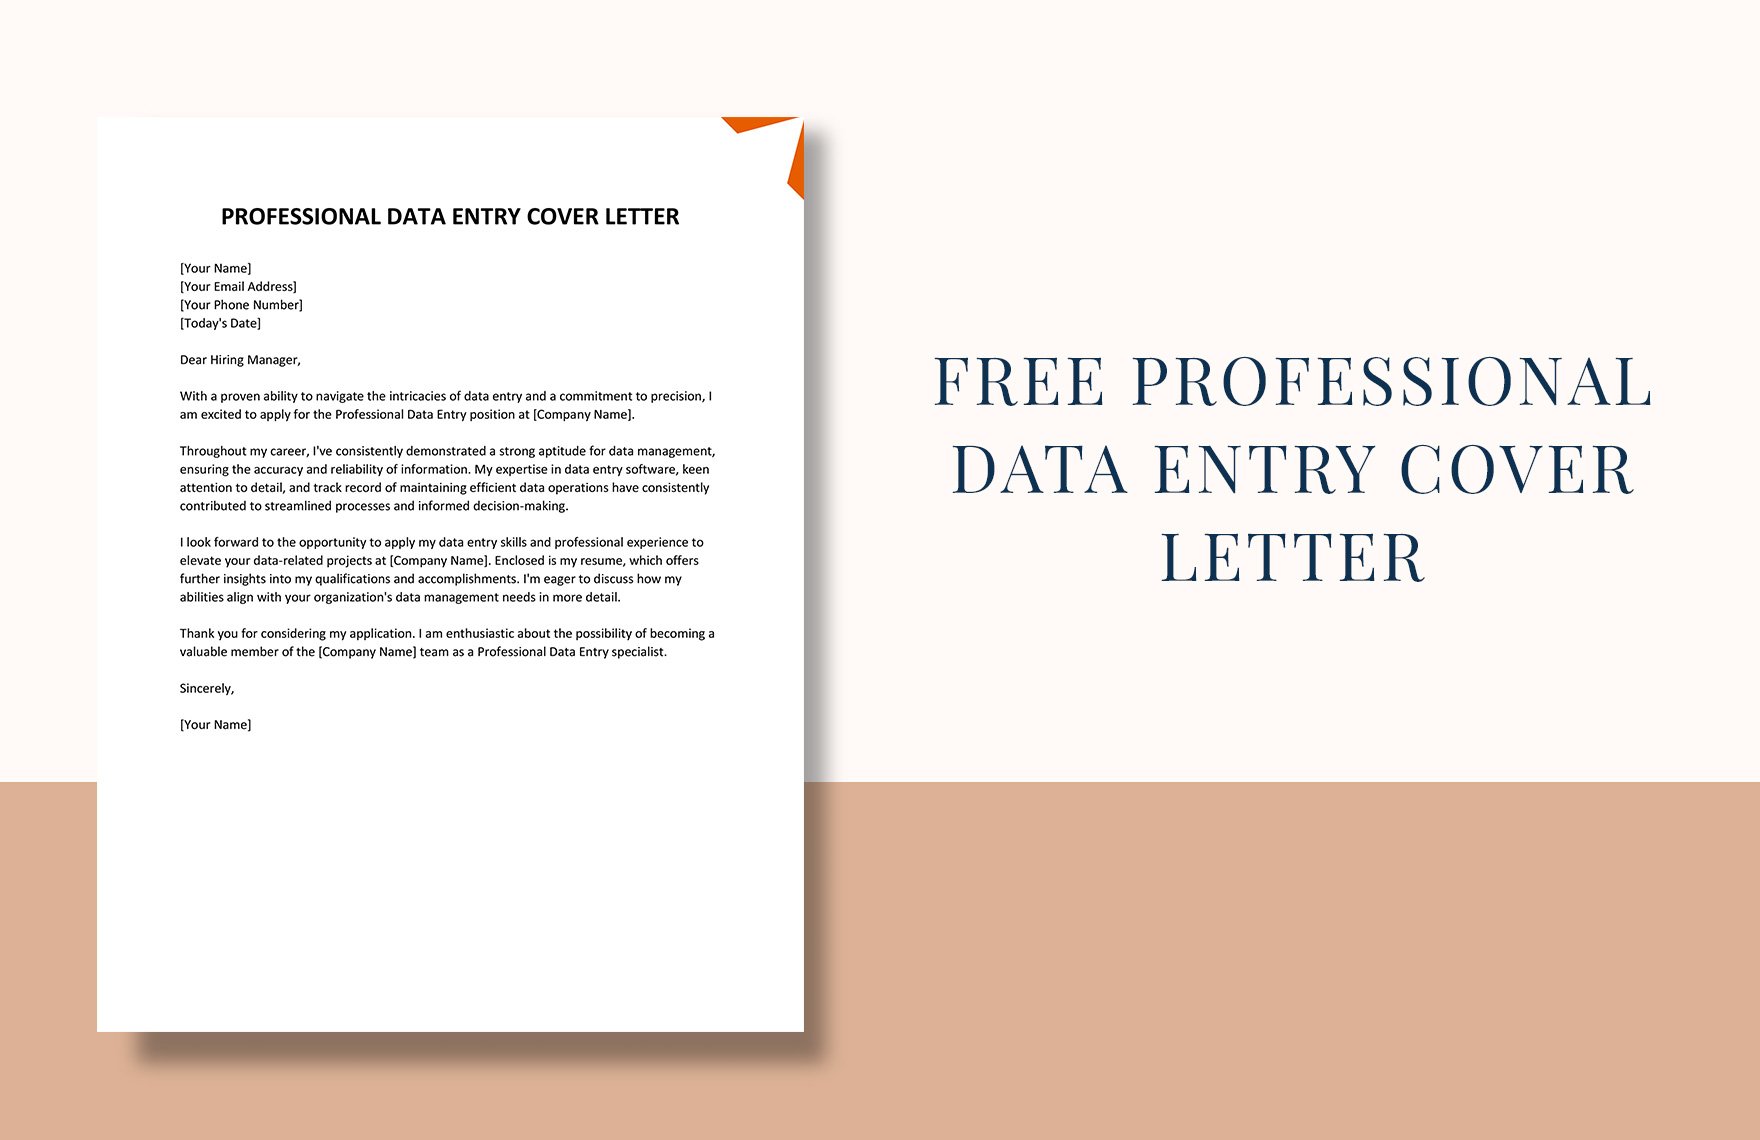 Professional Data Entry Cover Letter